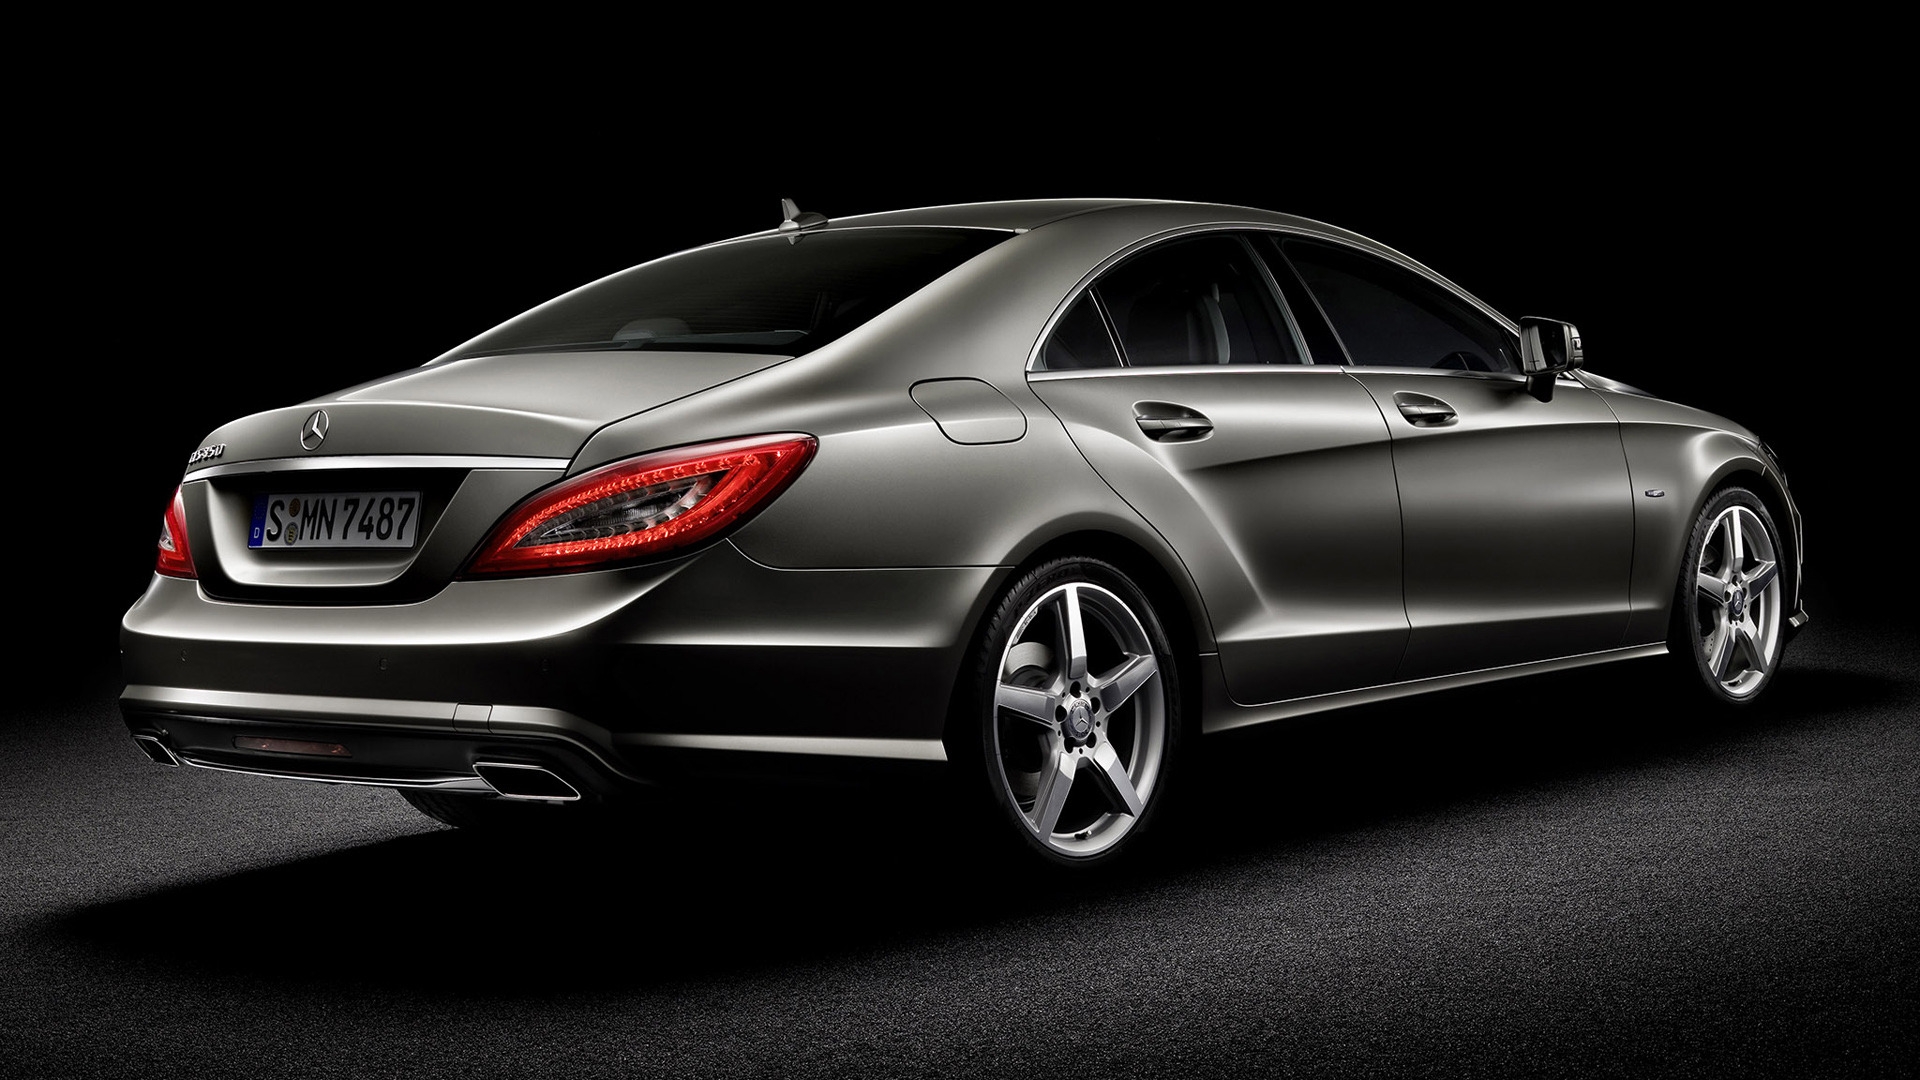 Mercedes CLS 2010 Rear for 1920 x 1080 HDTV 1080p resolution